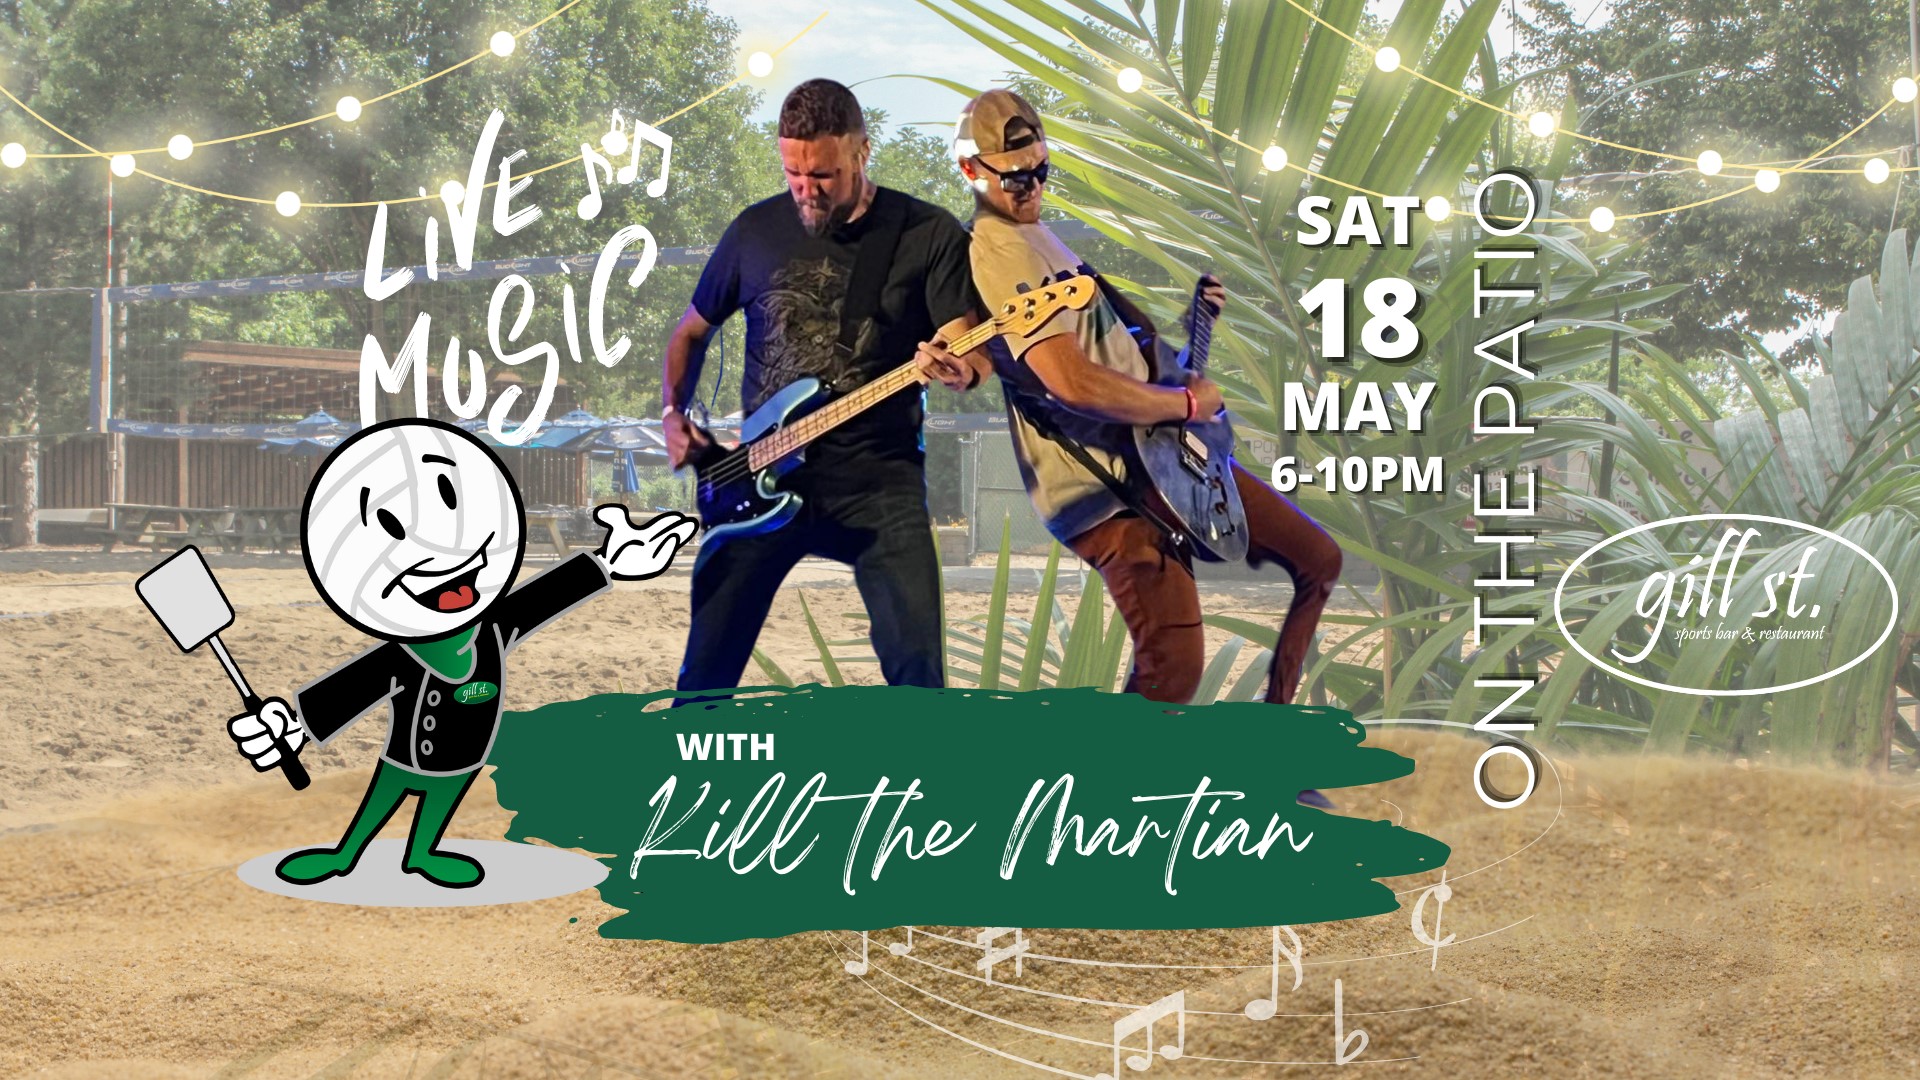 Live Music with Kill the Martian